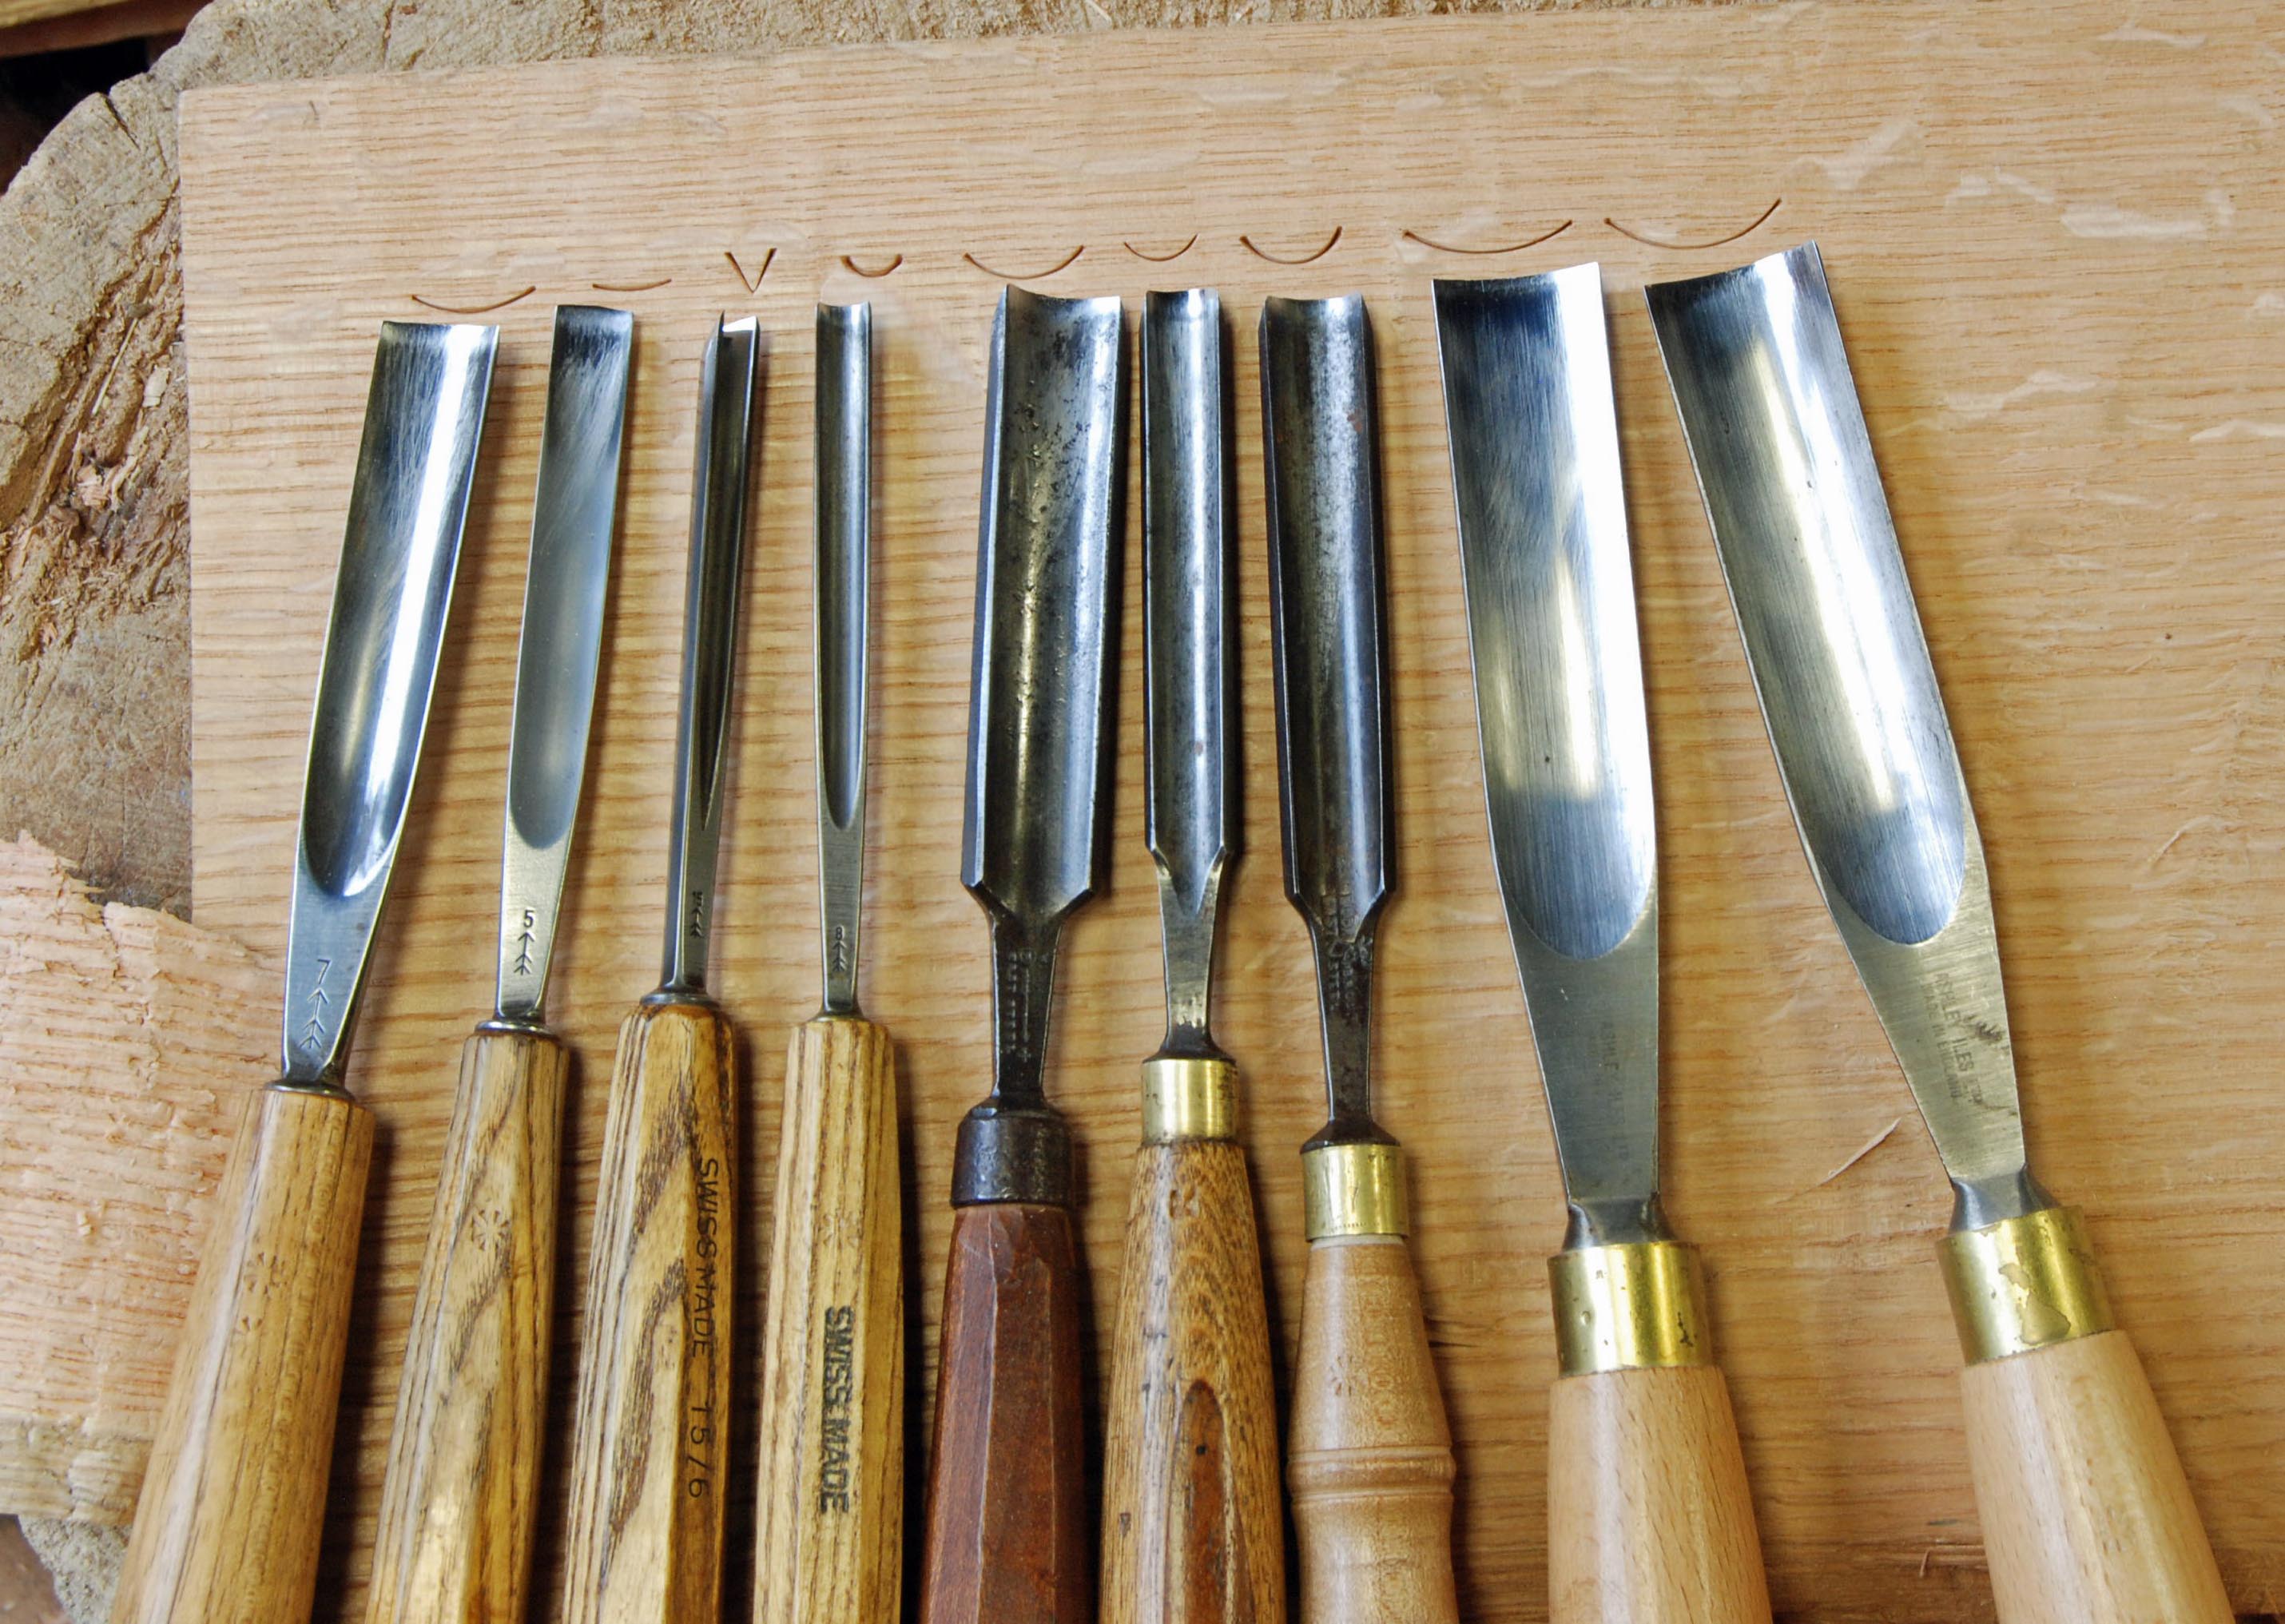 Used woodworking tools for sale uk